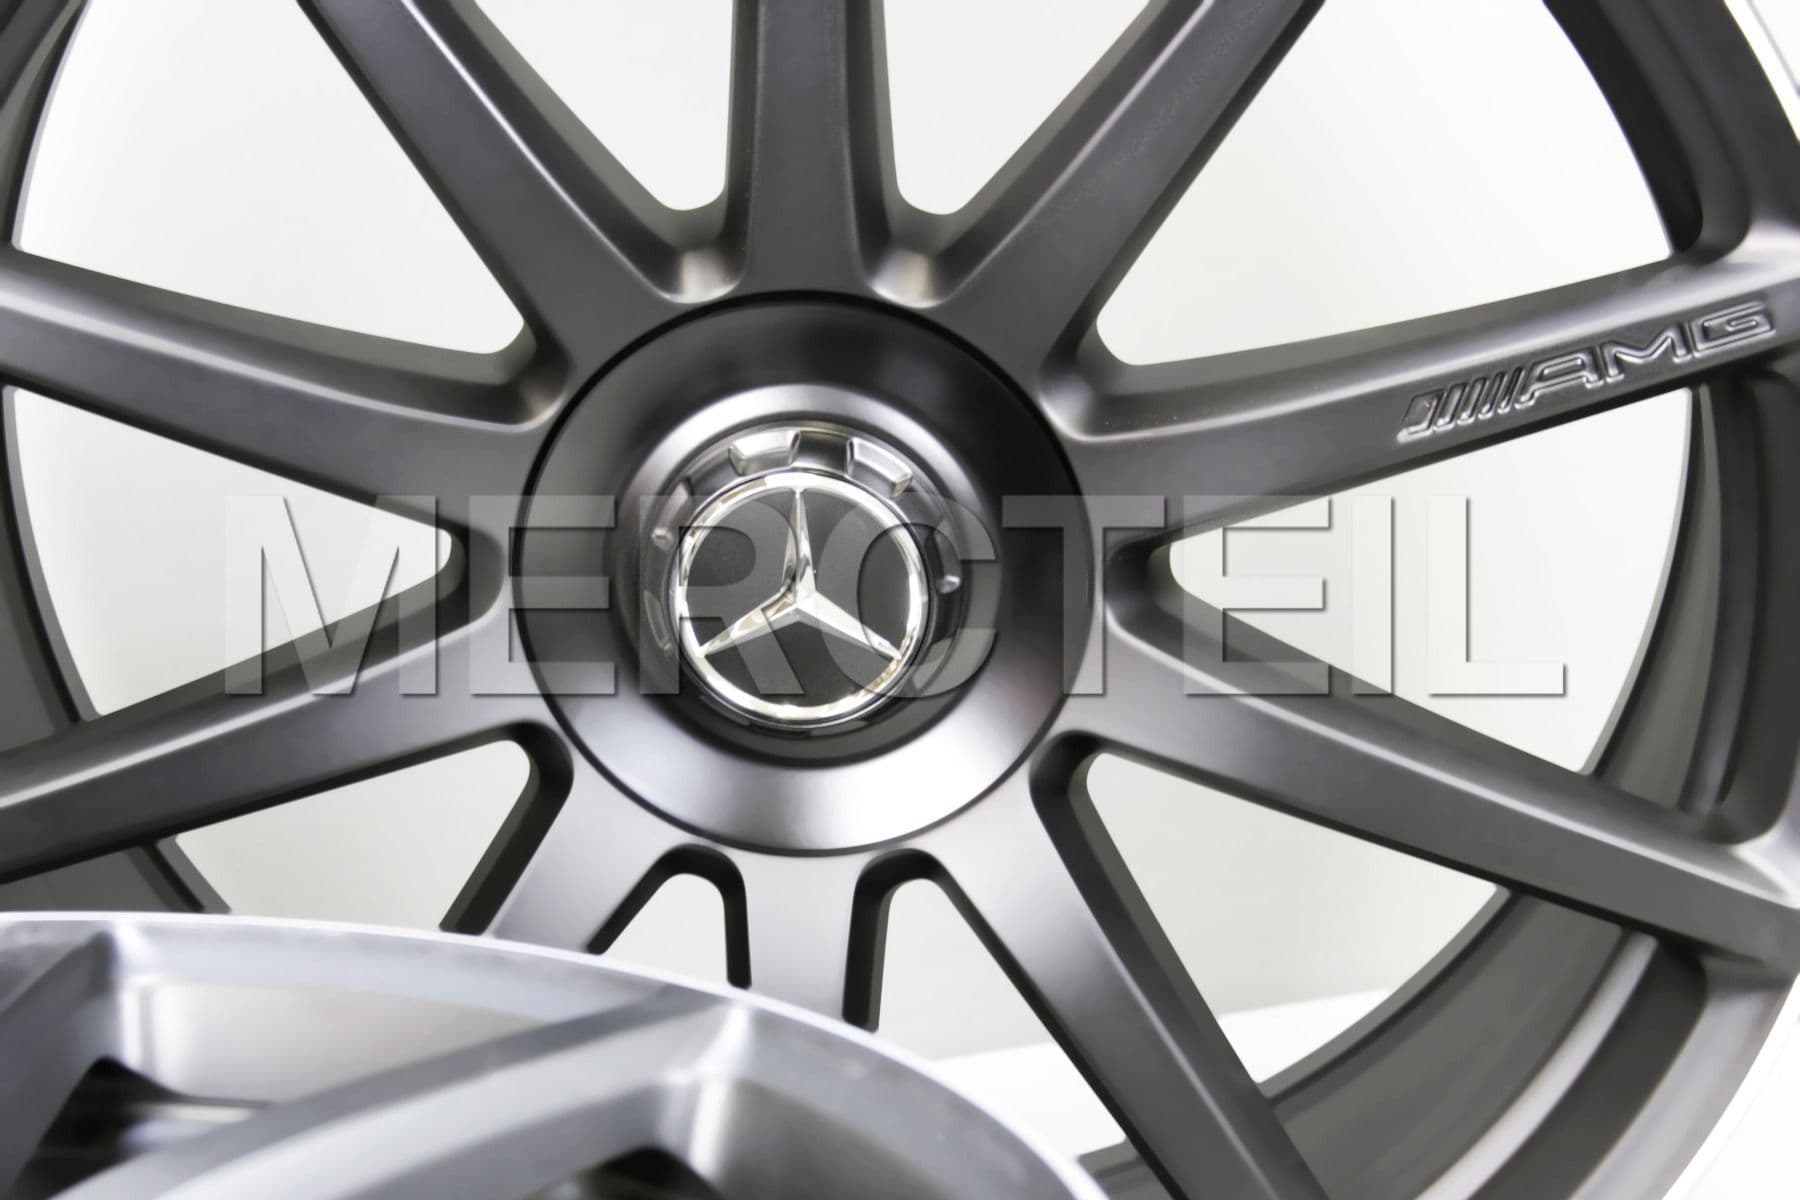 S-Class S63 AMG 10 Spoke Black Matte Forged Rims 217 222 20 Inch Genuine Mercedes-AMG (Part number: A22240107007X36)